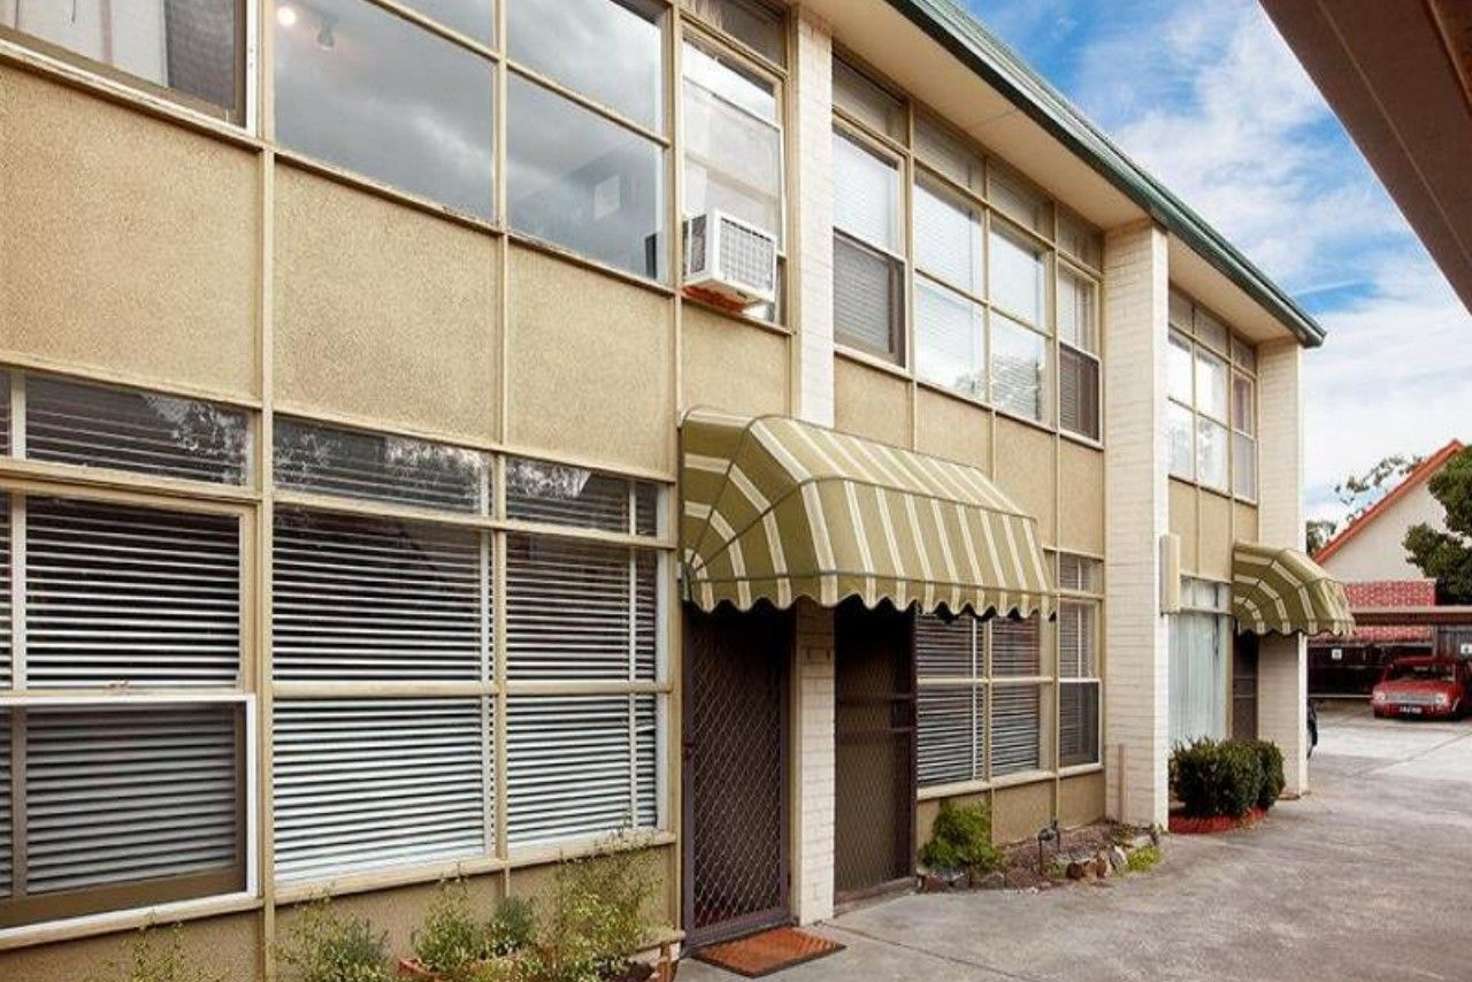 Main view of Homely apartment listing, 5/9 Murrumbeena Road, Murrumbeena VIC 3163